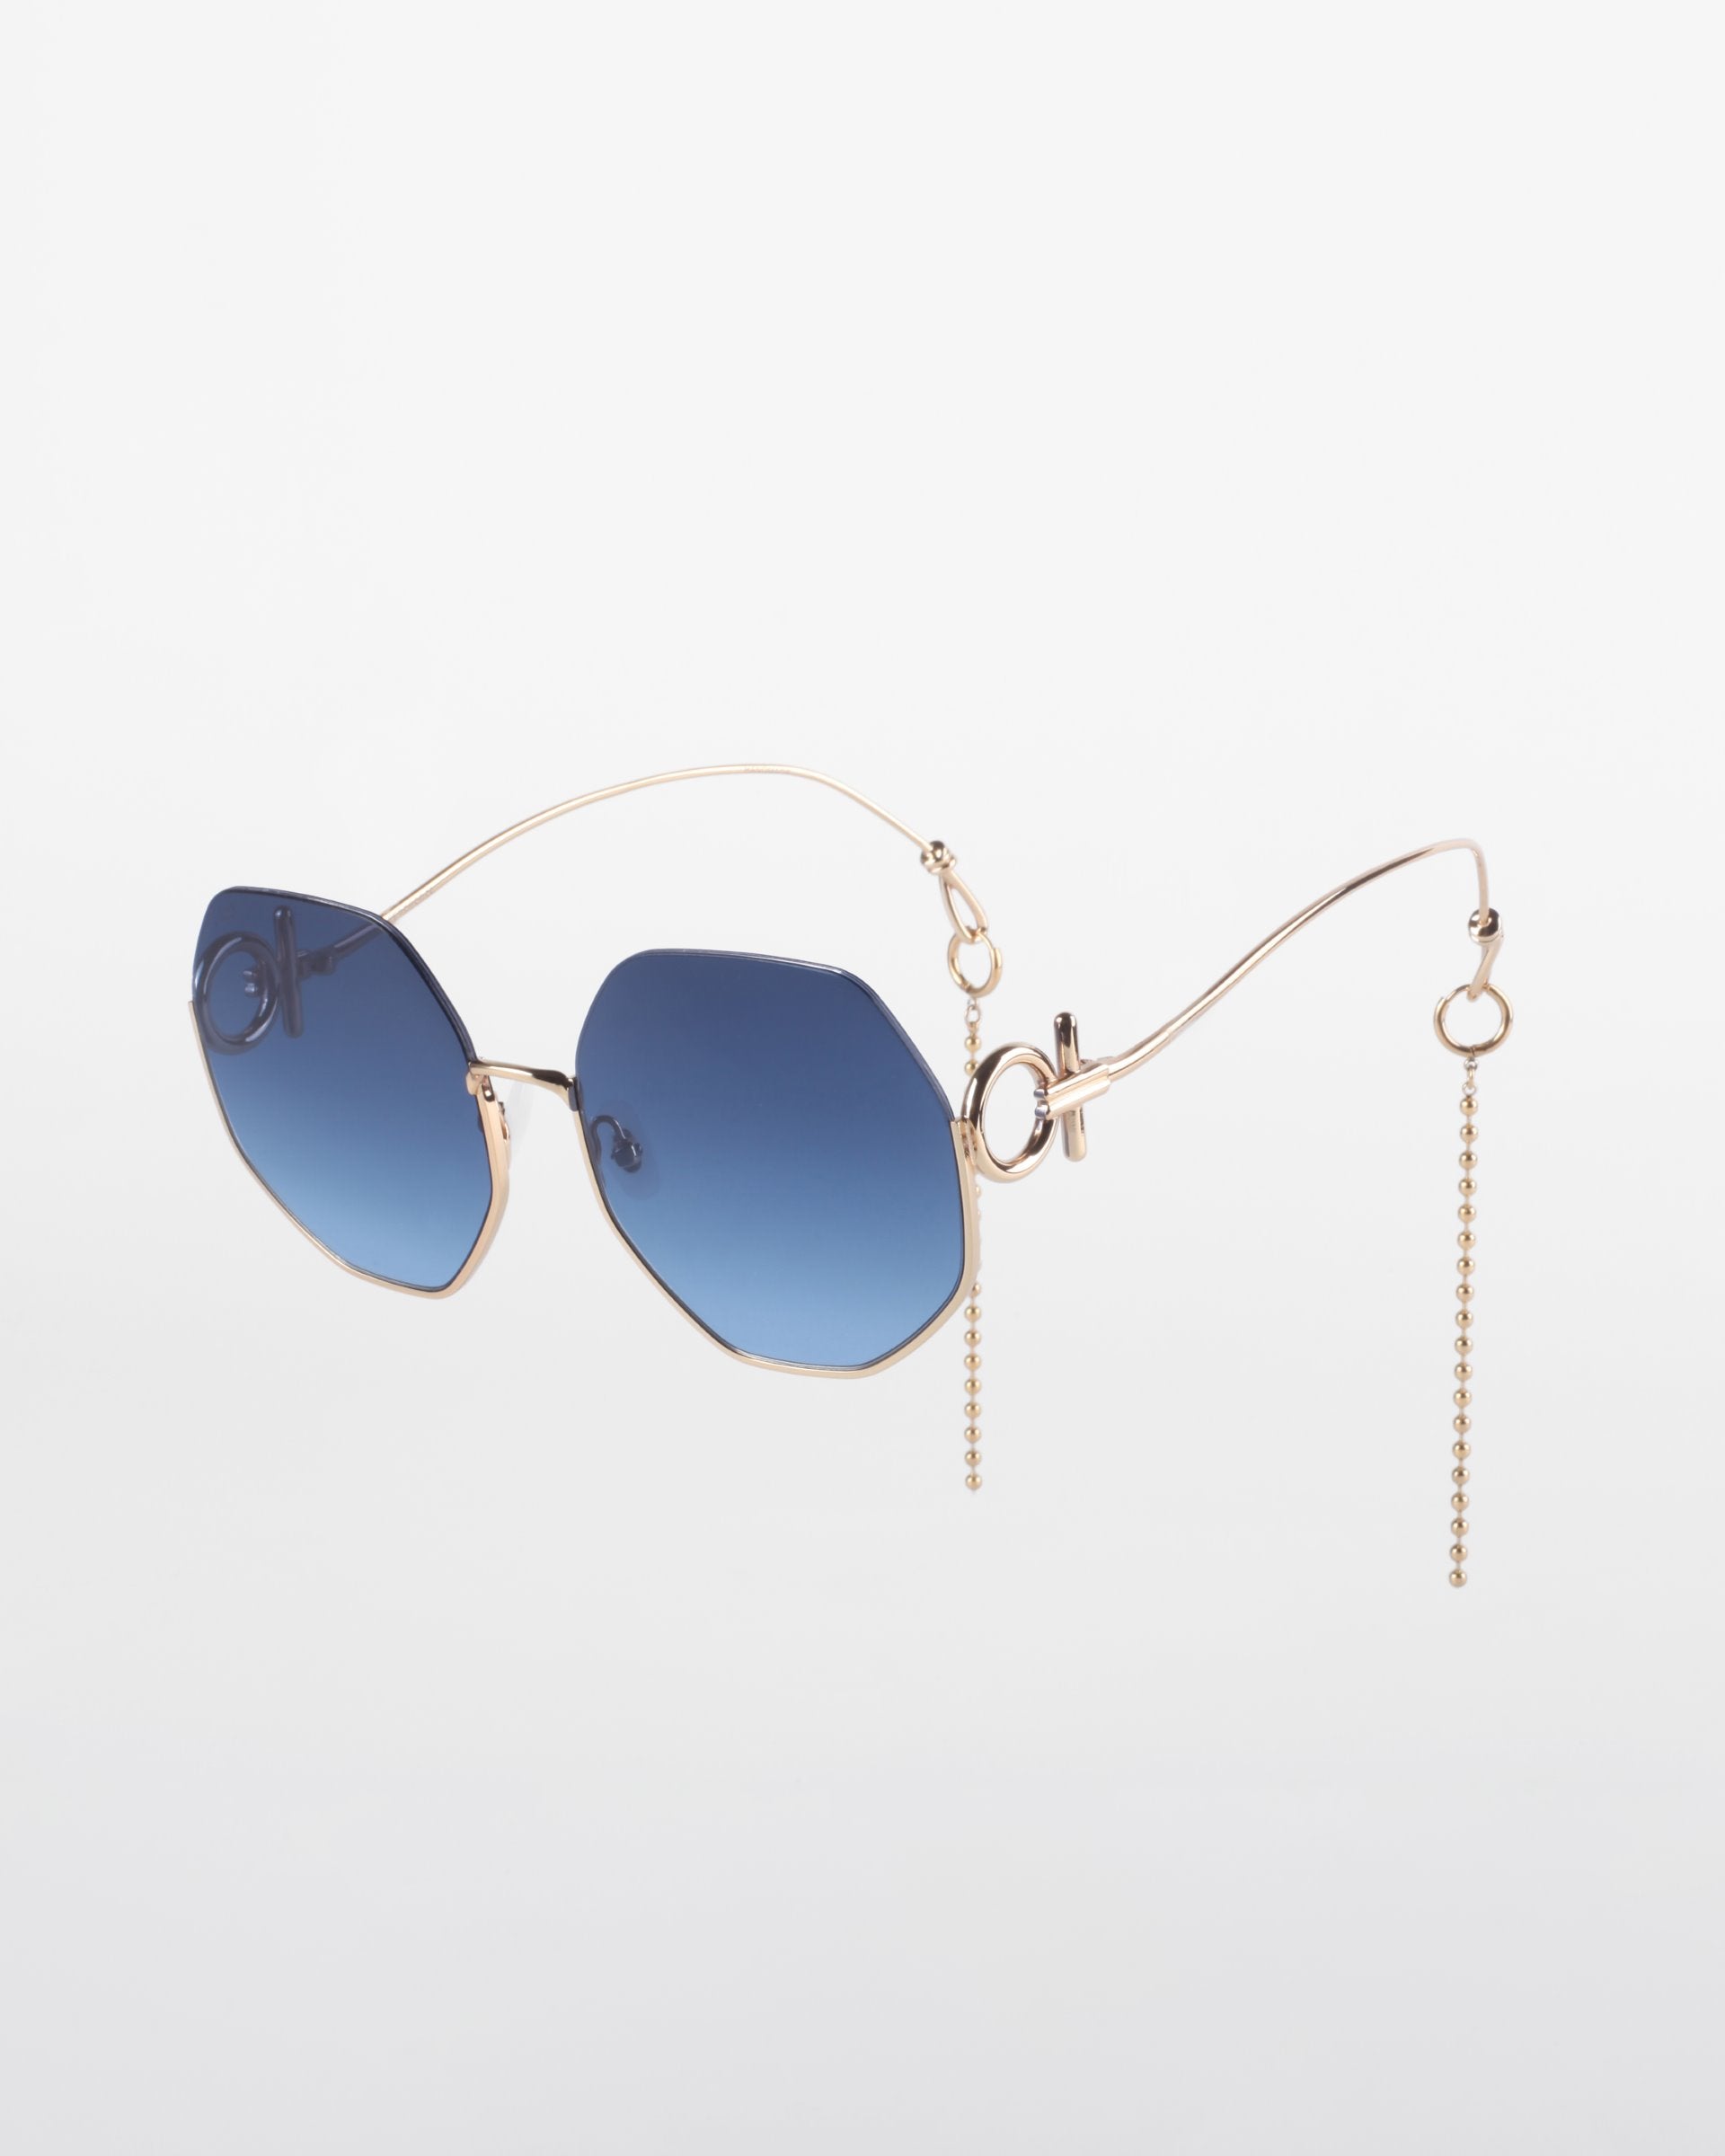 A limited edition pair of stylish sunglasses featuring blue-tinted hexagonal lenses, 18-karat gold-plated thin metal frames, and unique side arms with decorative chain accents. The background is plain white. The product name is "Palace" by For Art's Sake®.